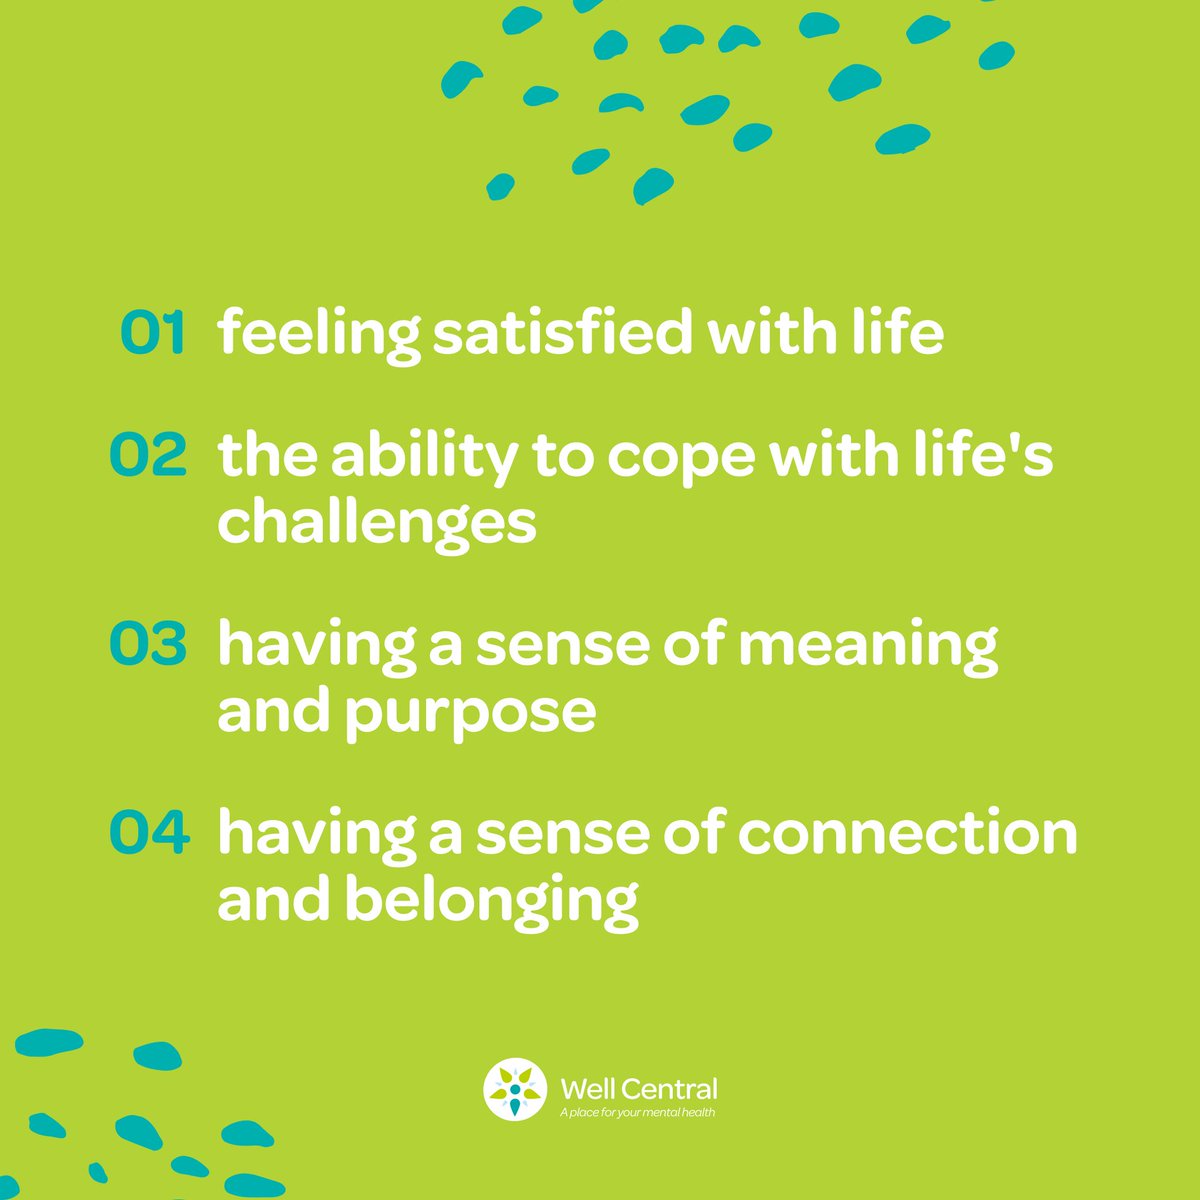 Well-being is more than just having physical wellness. It's fulfillment, joy, peace, and purpose.
.
.
.
.
#wellbeing #wellcentral #mentalhealthcourses #mentalhealthresources #mentalhealthisimportant #mentalhealthmatters #wellbeingjourney #wellness